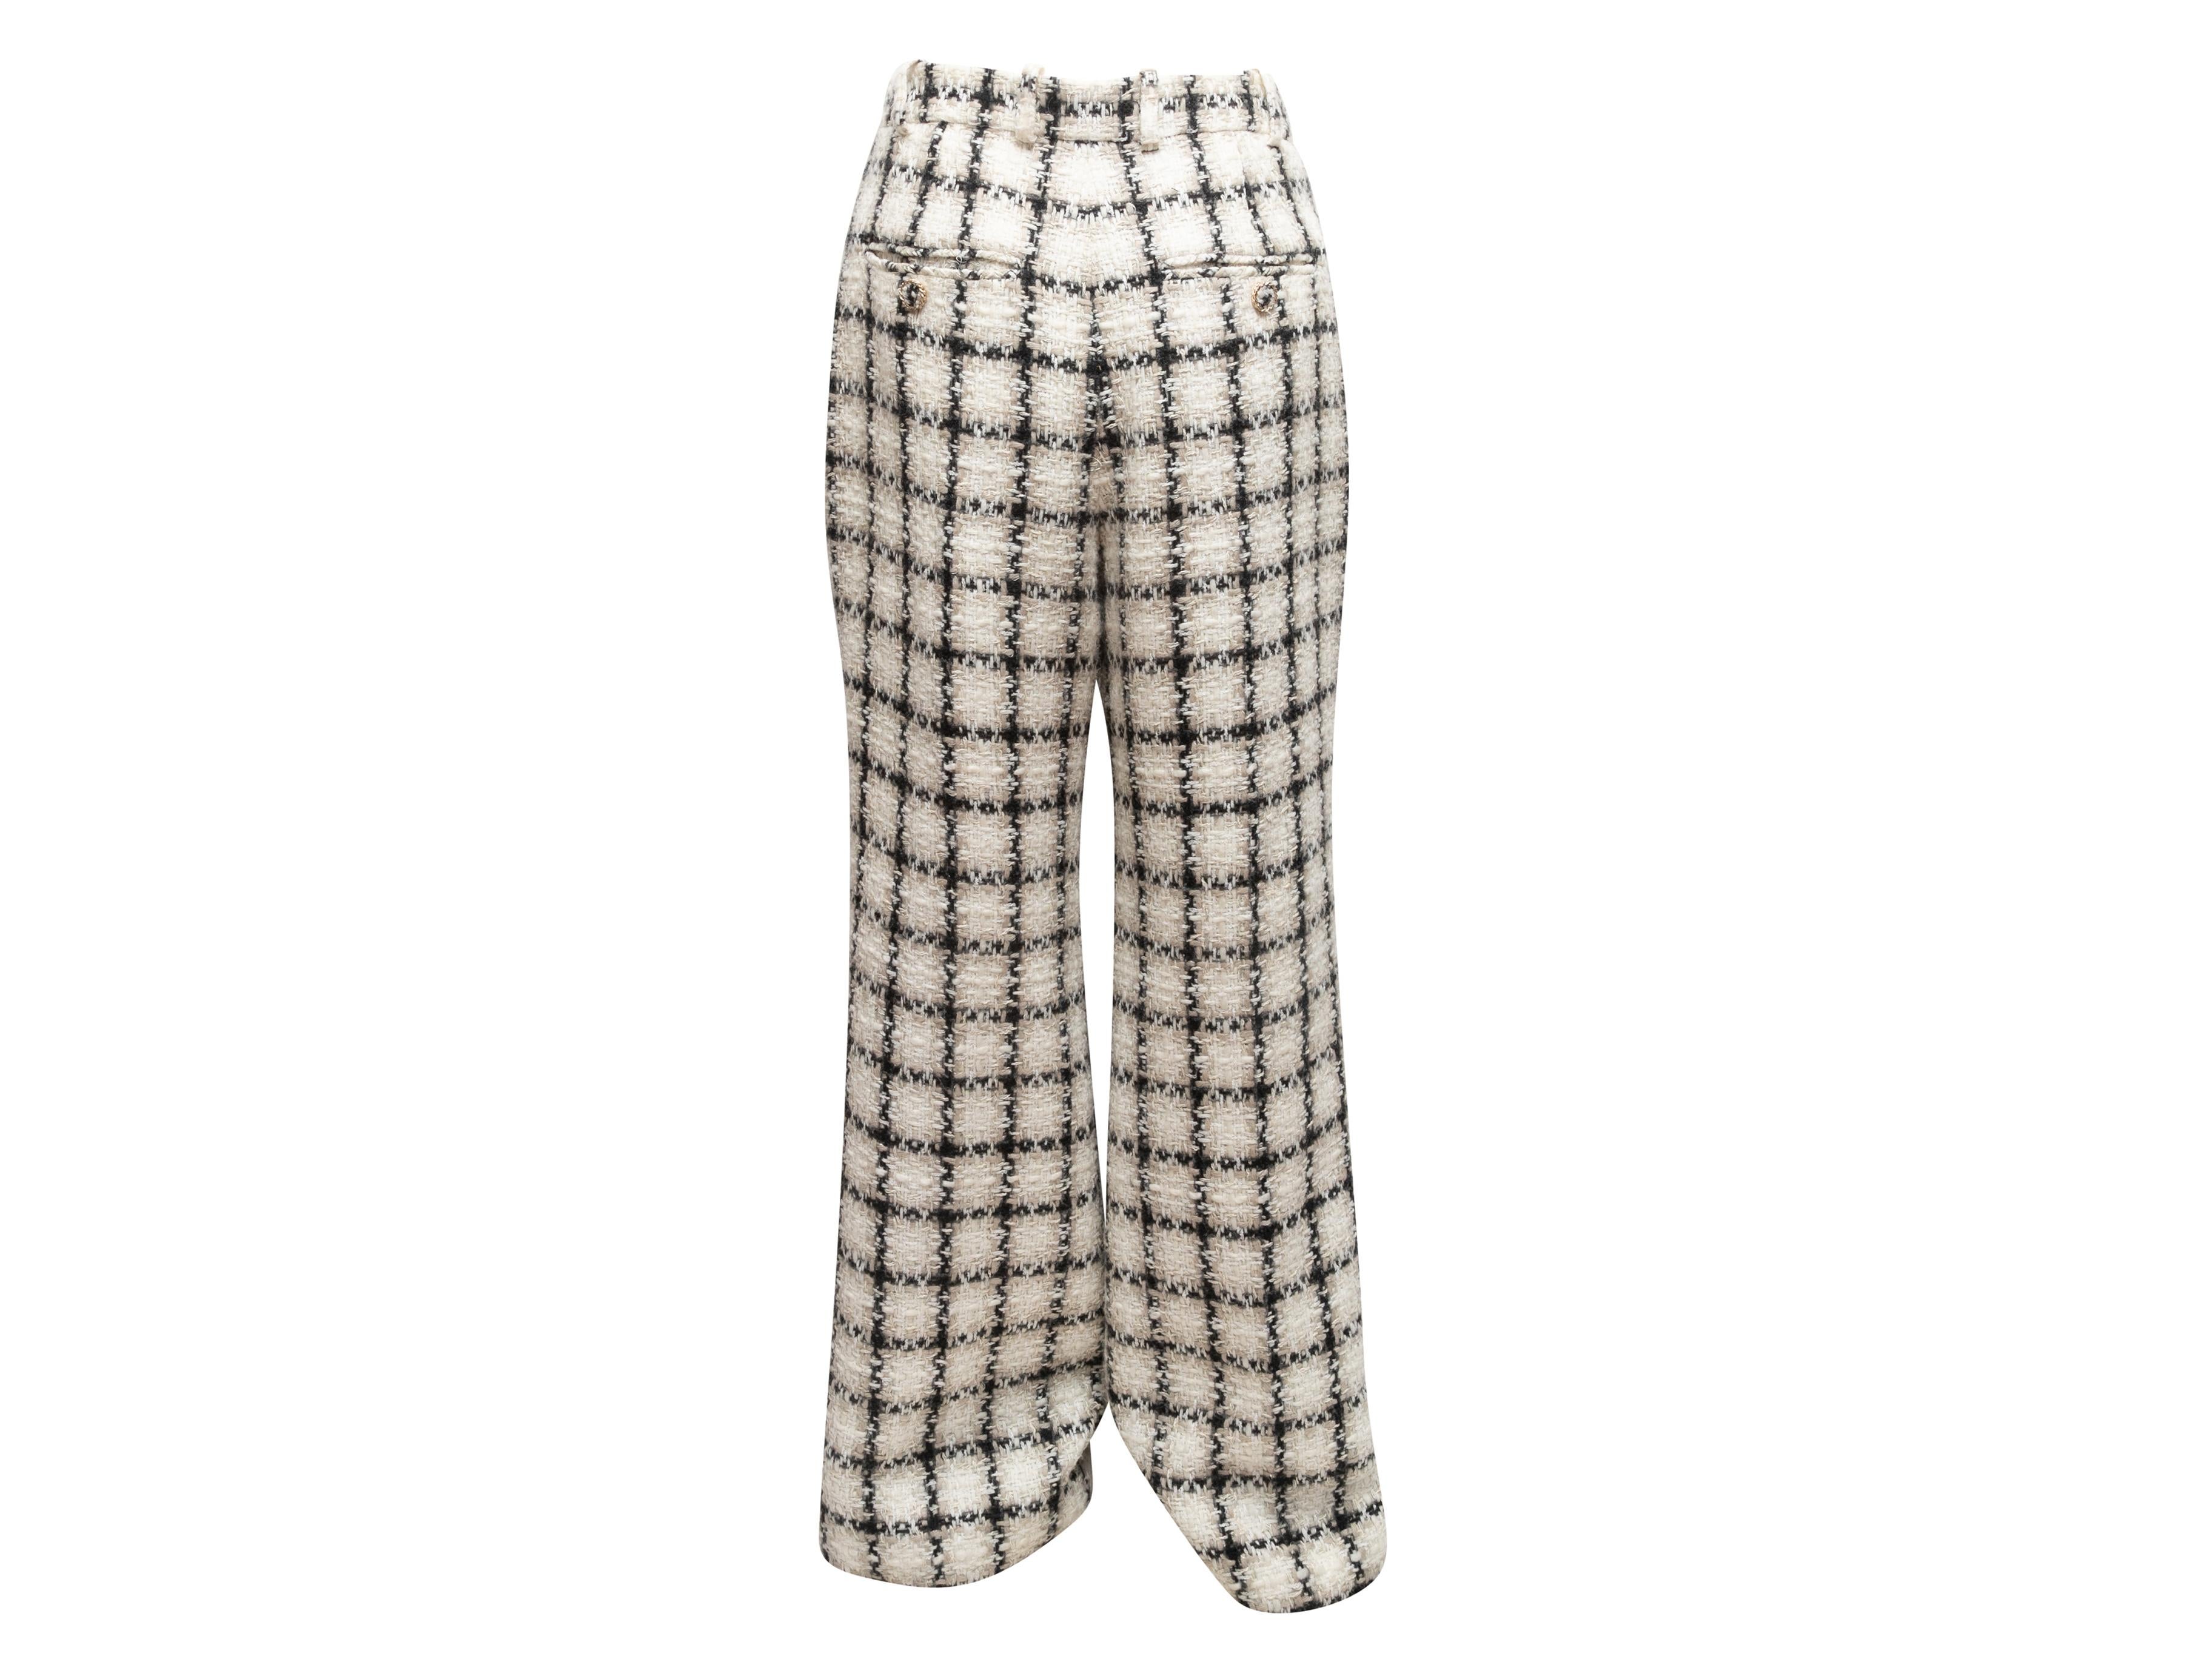 Cream and black wool-blend plaid tweed trousers by Chanel. Four pockets. Fron zip closure. Designer size 40. 30